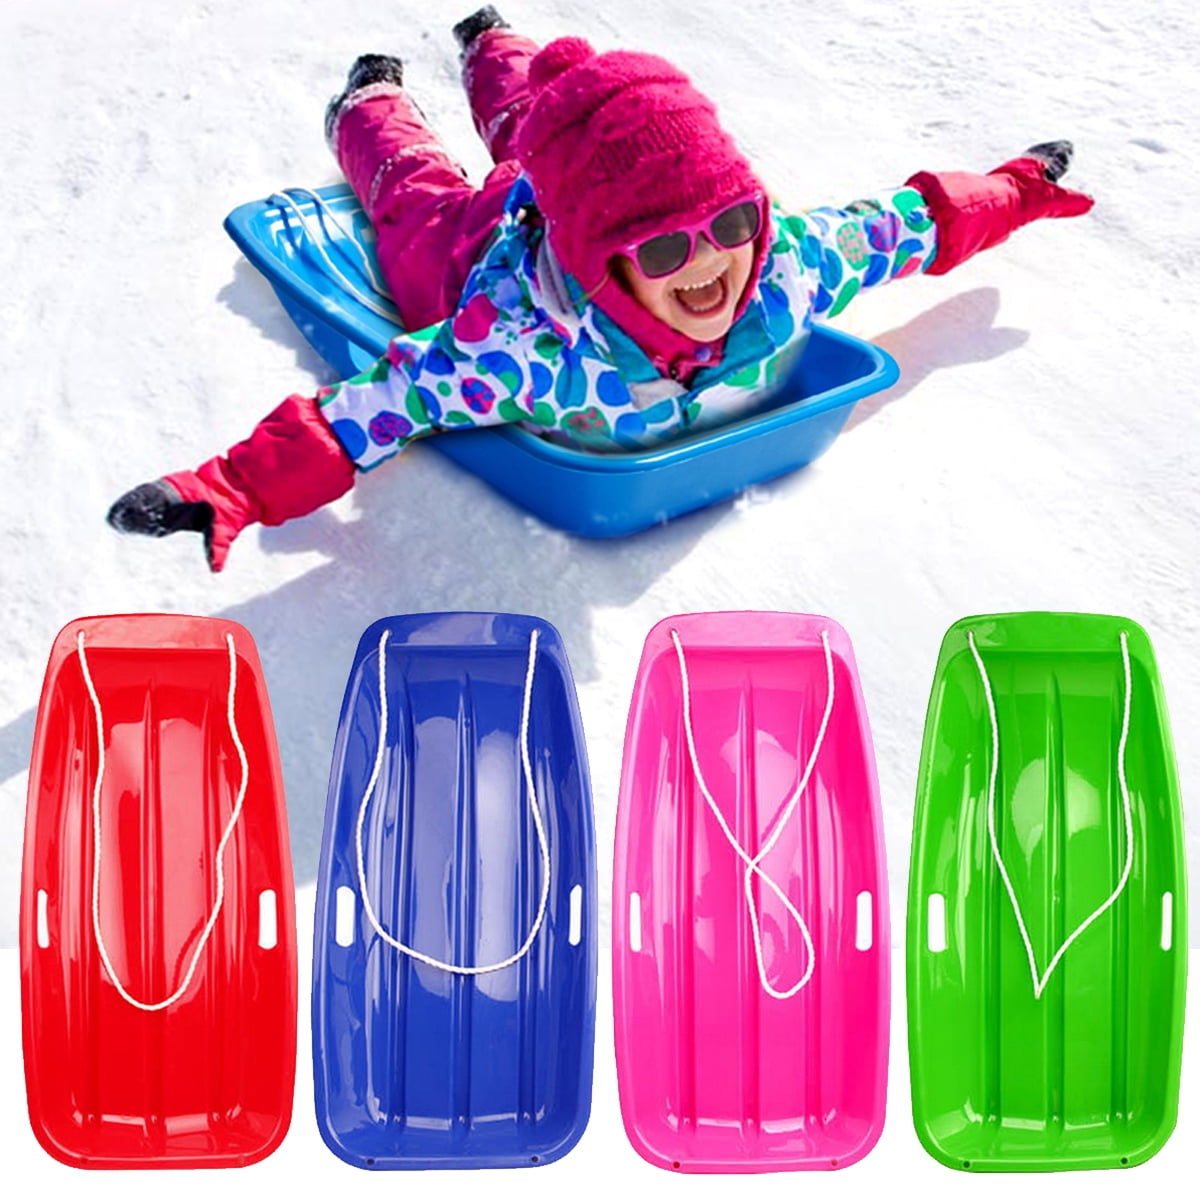 Sand Grass Snow Skiing Snowboard Sleigh Plastic Sledge with Pull Rope Family Fun Slider for Children Snow Sled Kids Toboggan Downhill Pull Sled